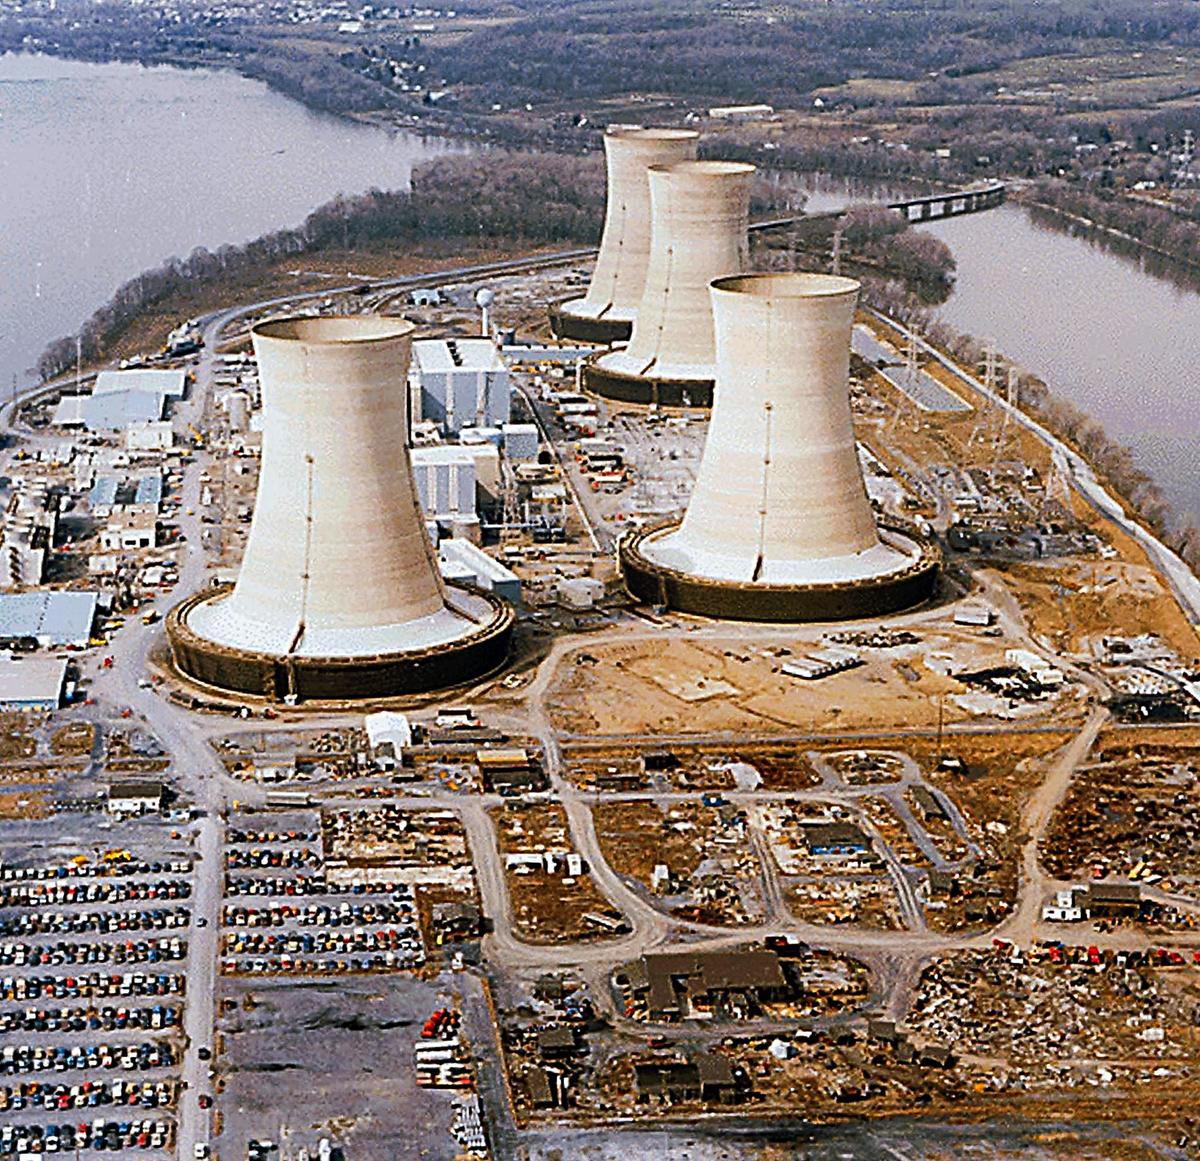 A view of the Three Mile Island nuclear power plant near Harrisburg, Pa., on April 11, 1979. (THE NATIONAL ARCHIVES/AFP via Getty Images)